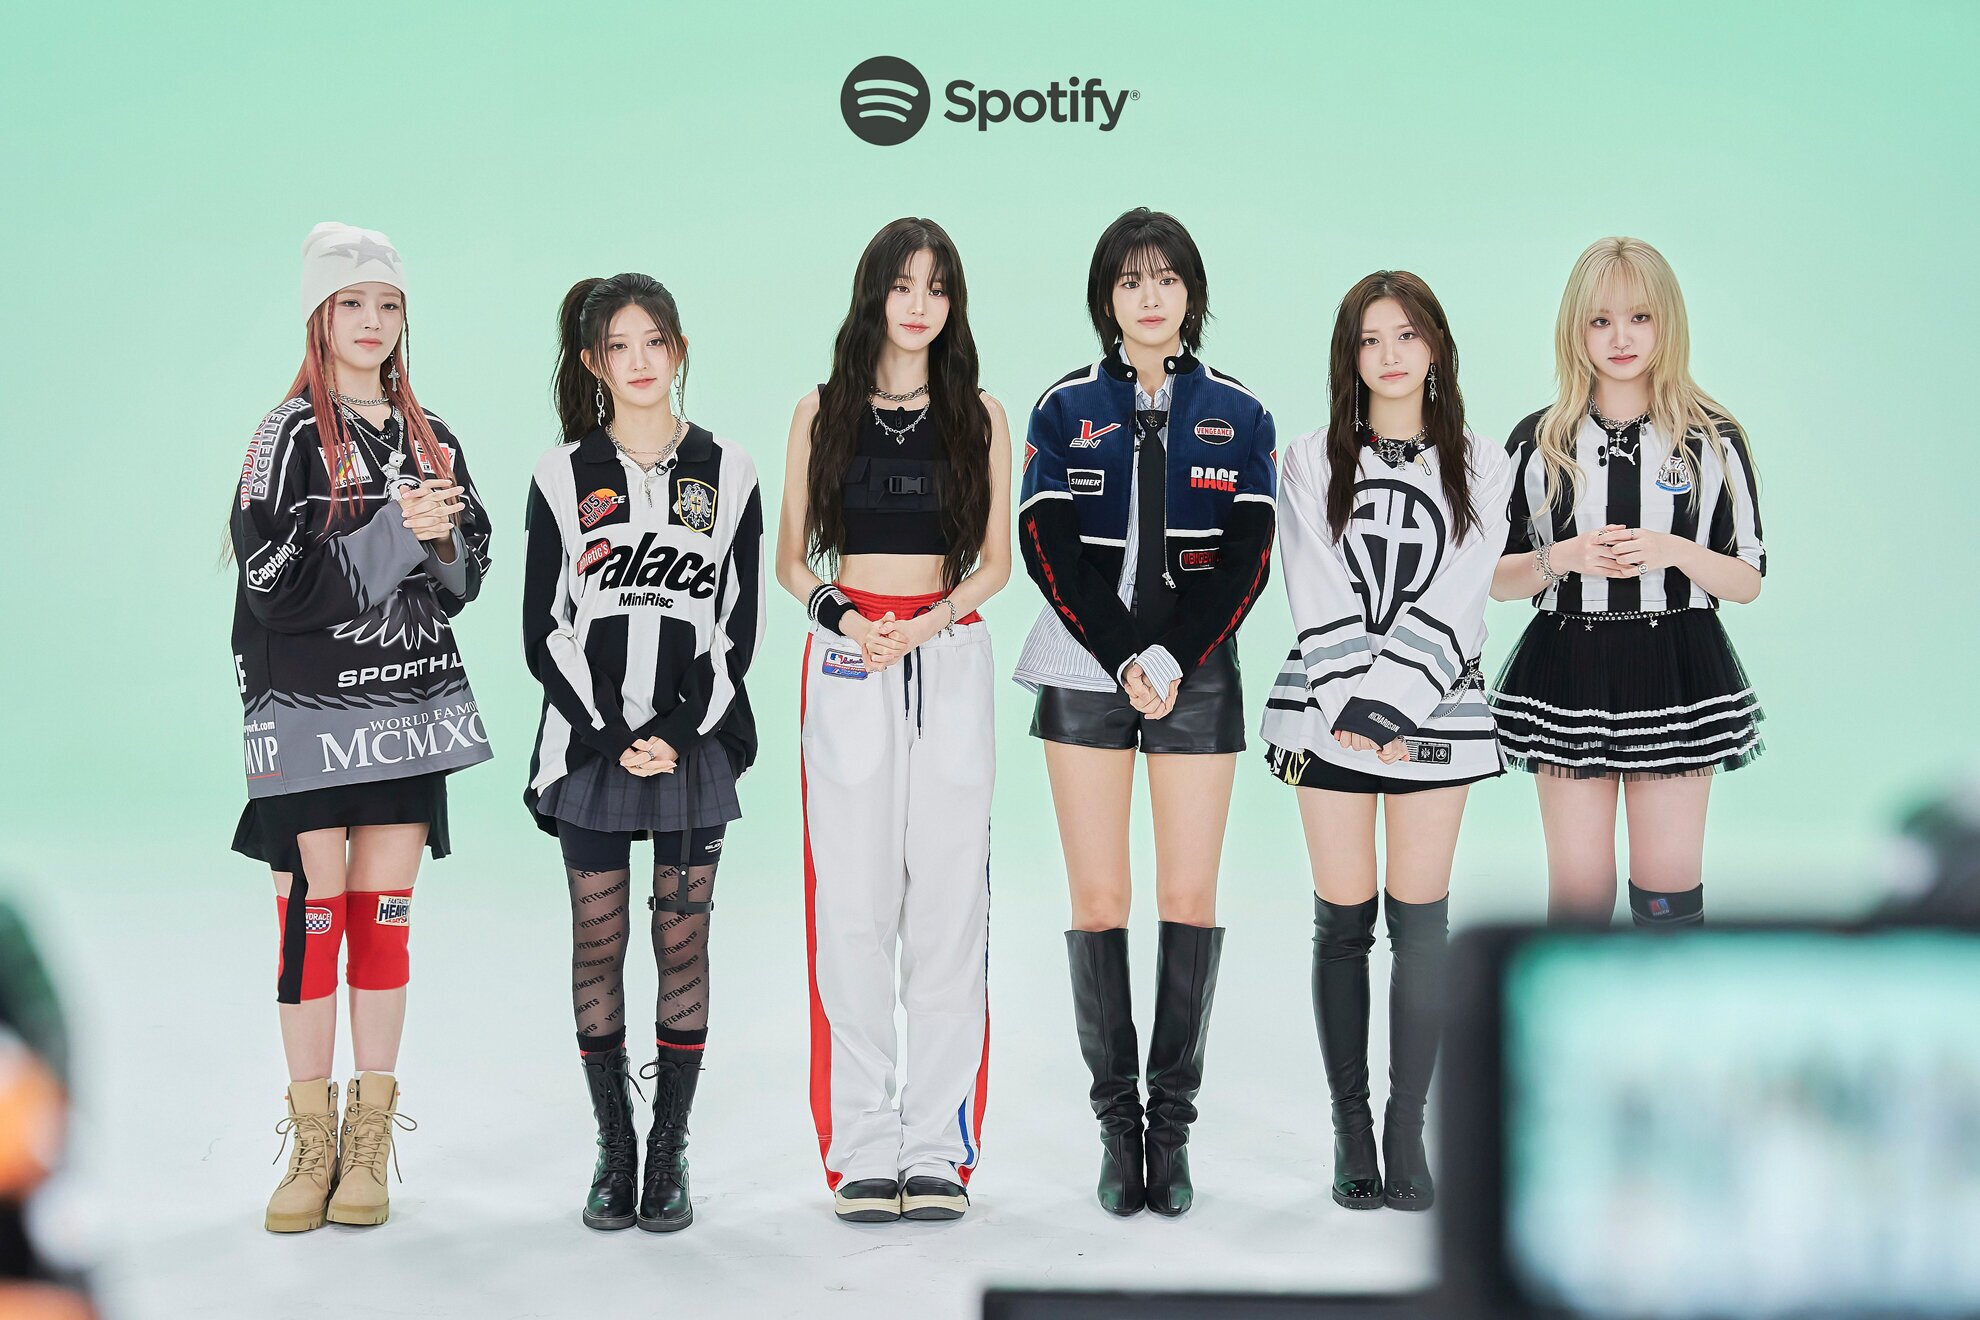 231011 Spotify Twitter Update - IVE | kpopping